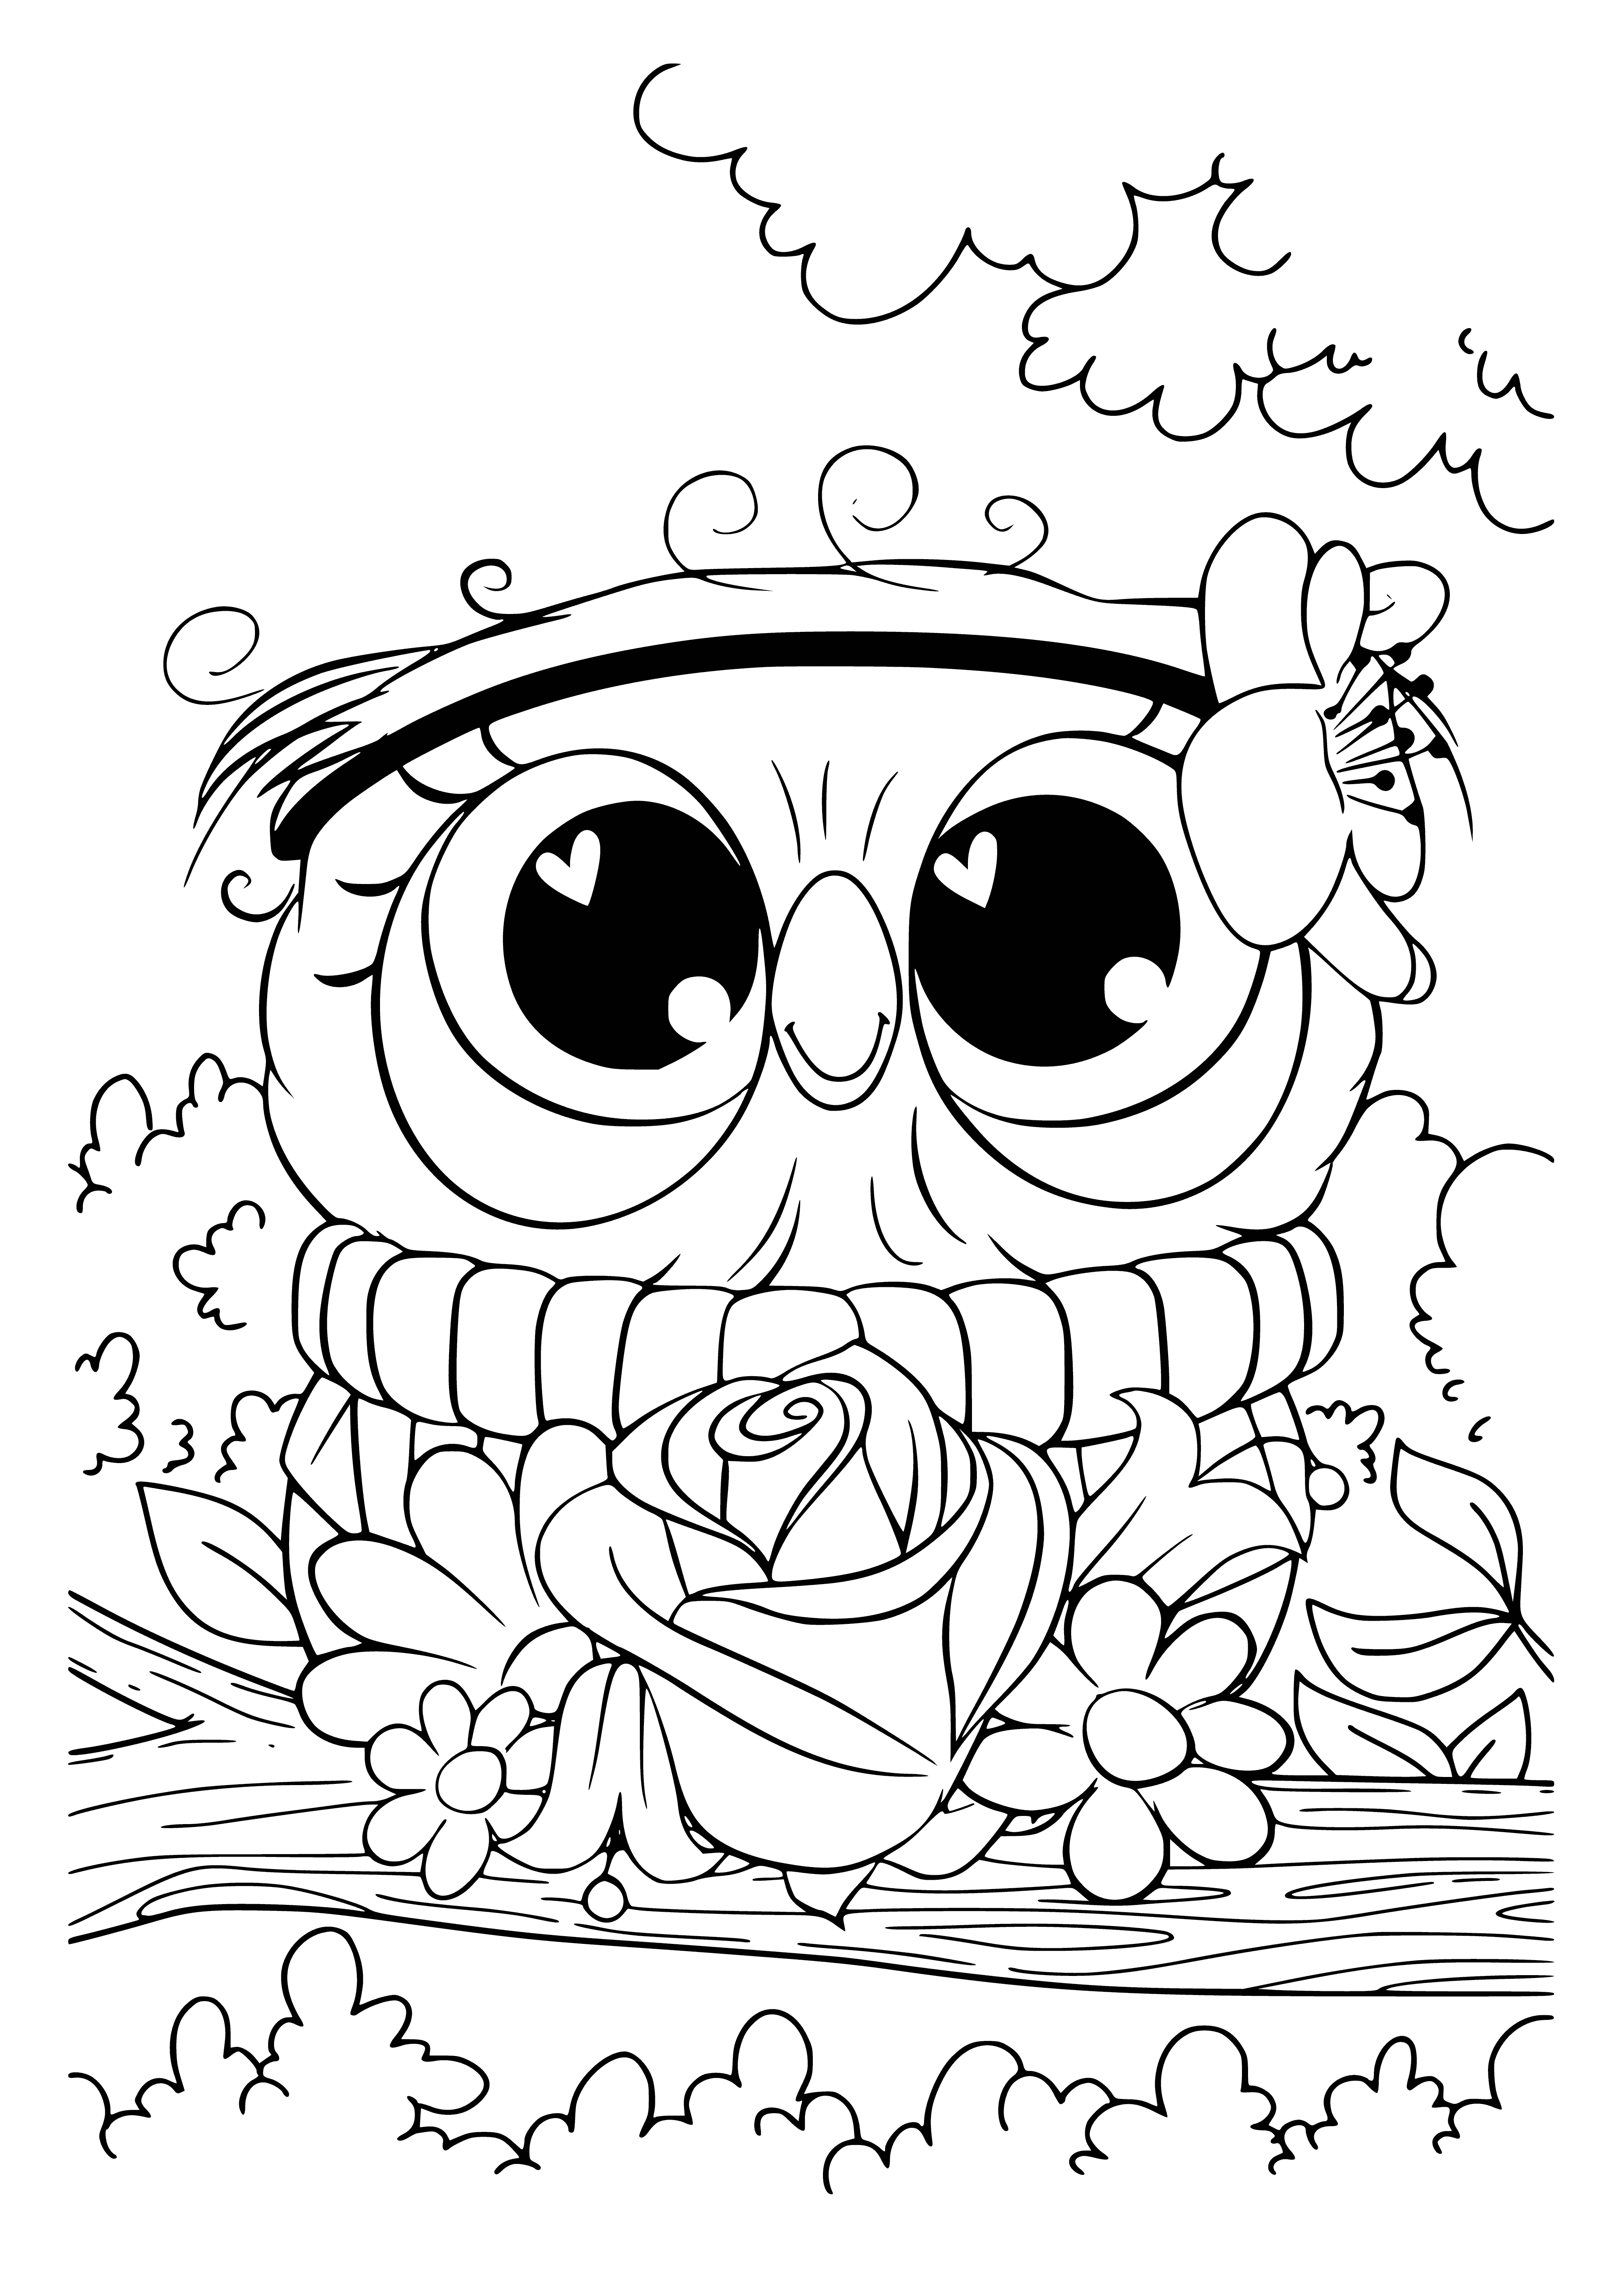 coloring page: Kawaii cute owl surrounded by colorful, cute items with big smile looks very happy. #kawaii #cute #coloringpages